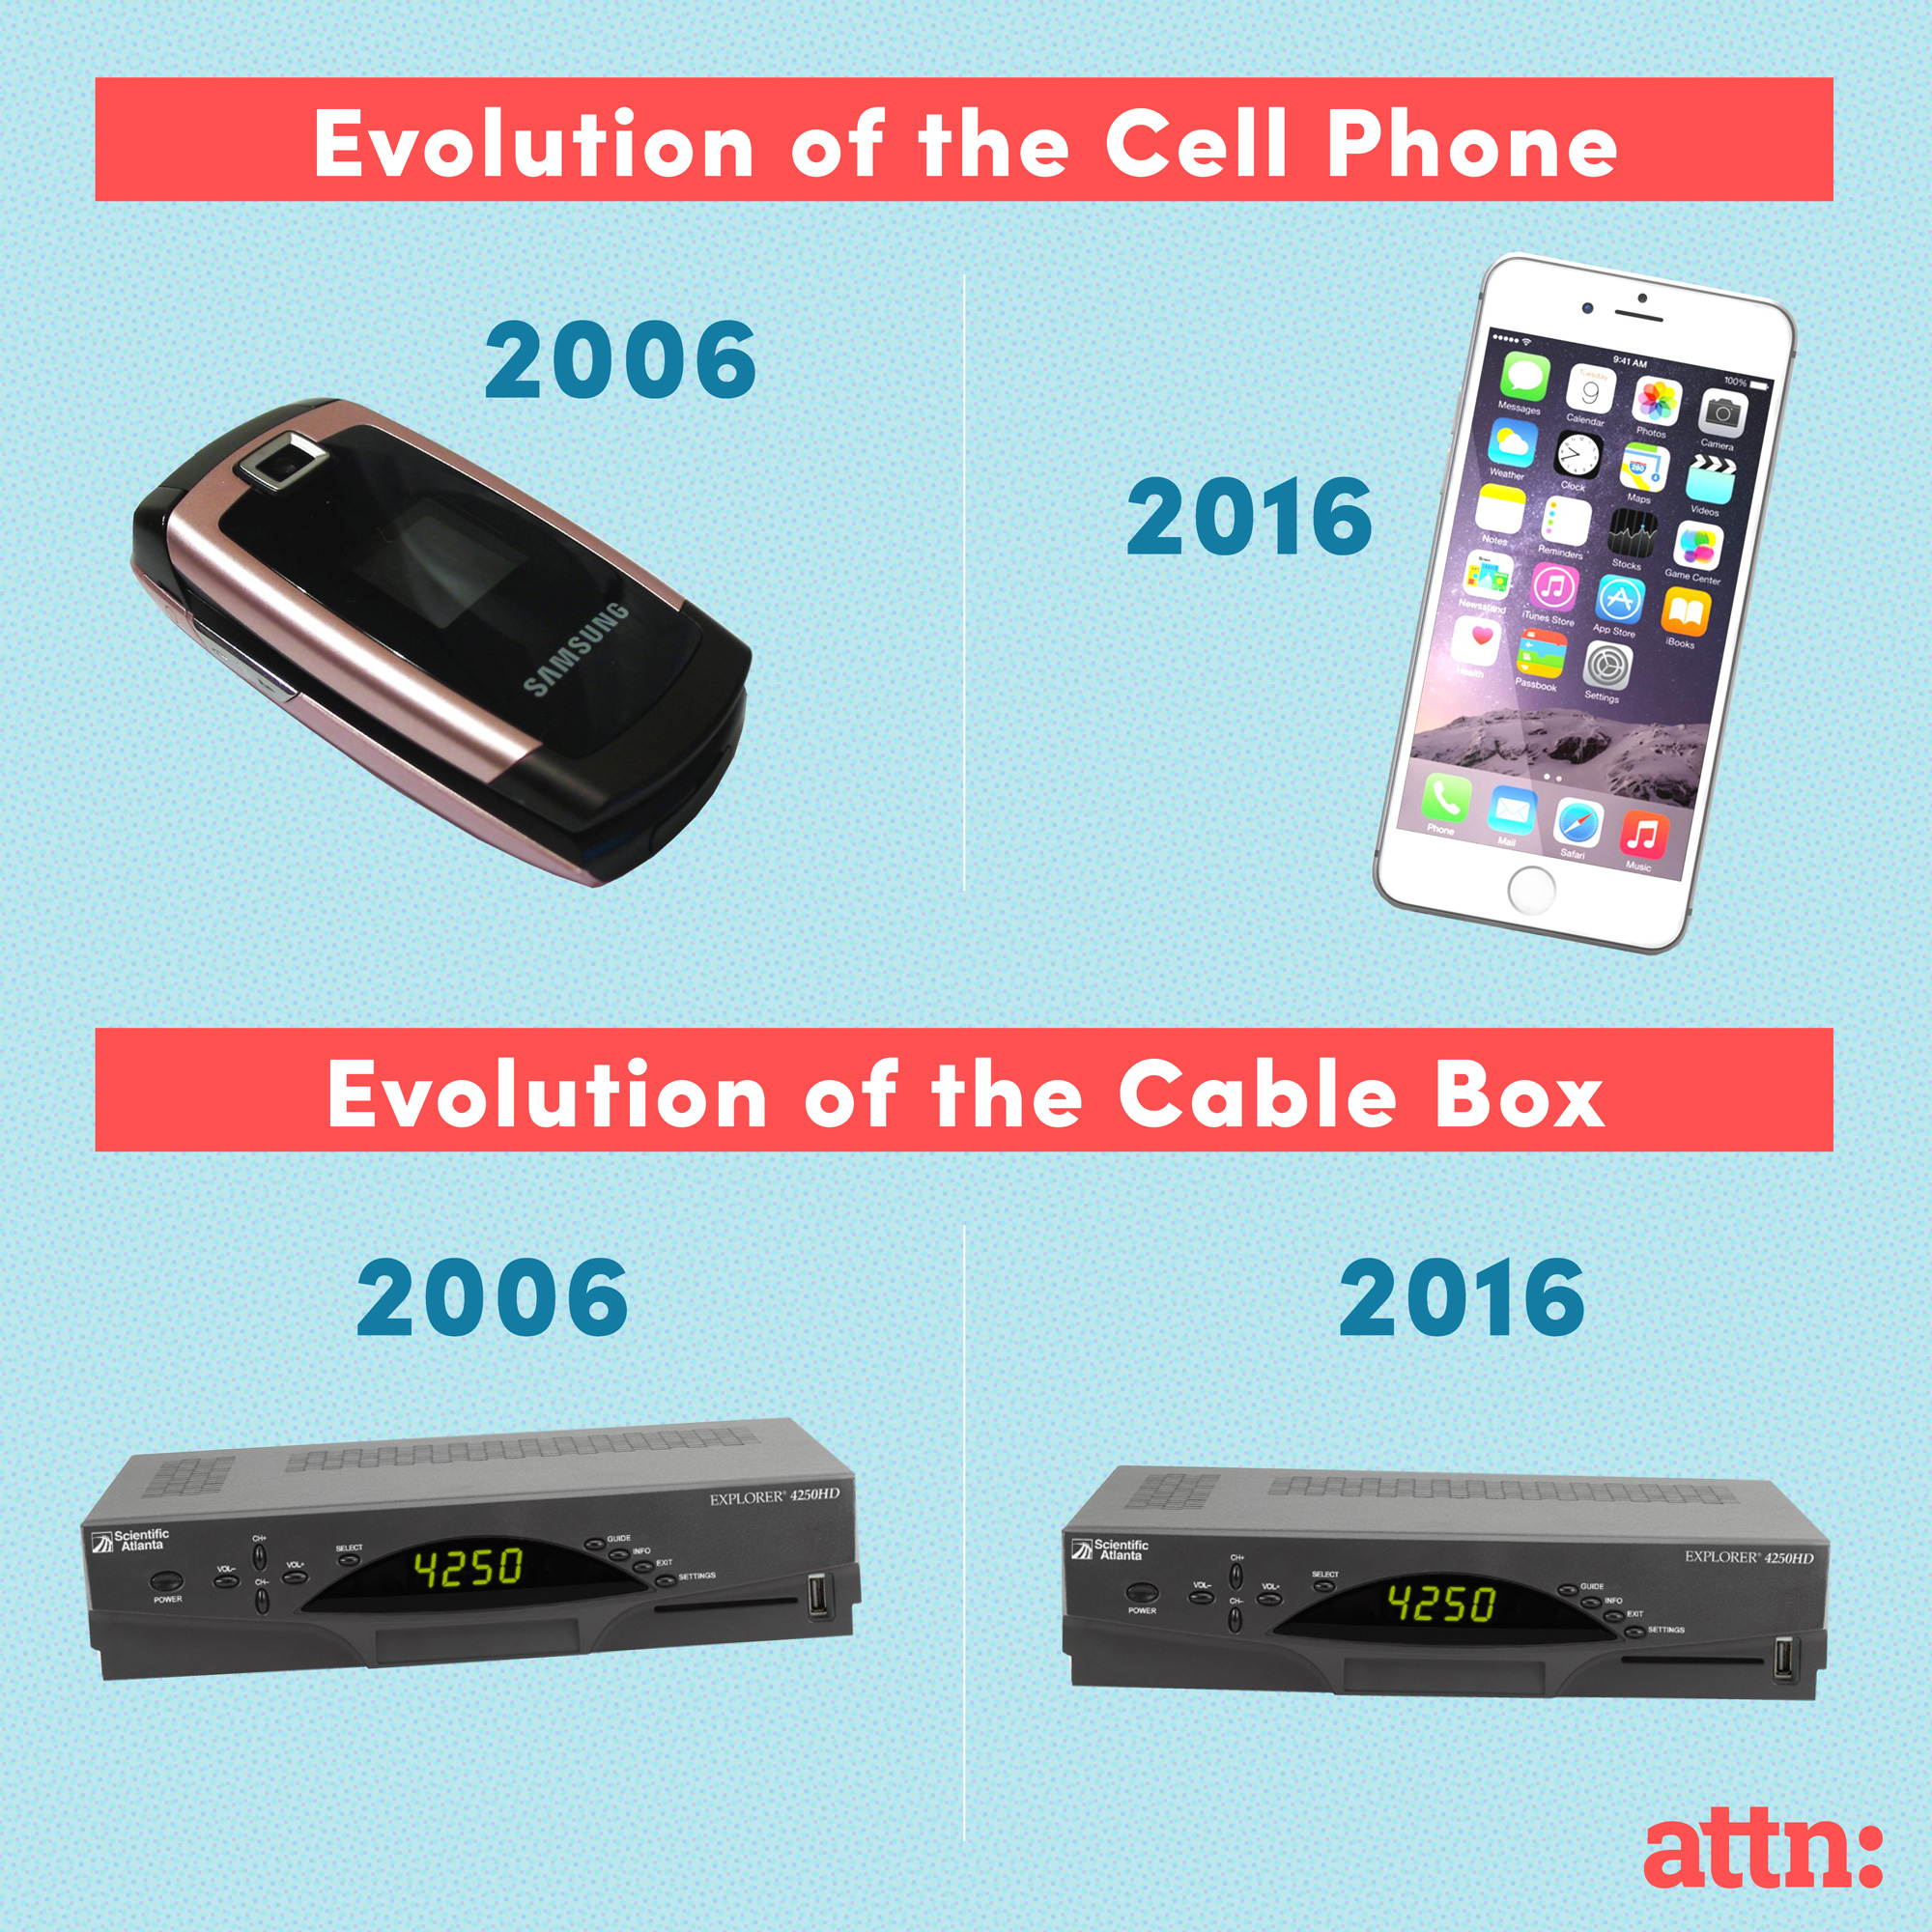 Evolution of the Cable Box Image